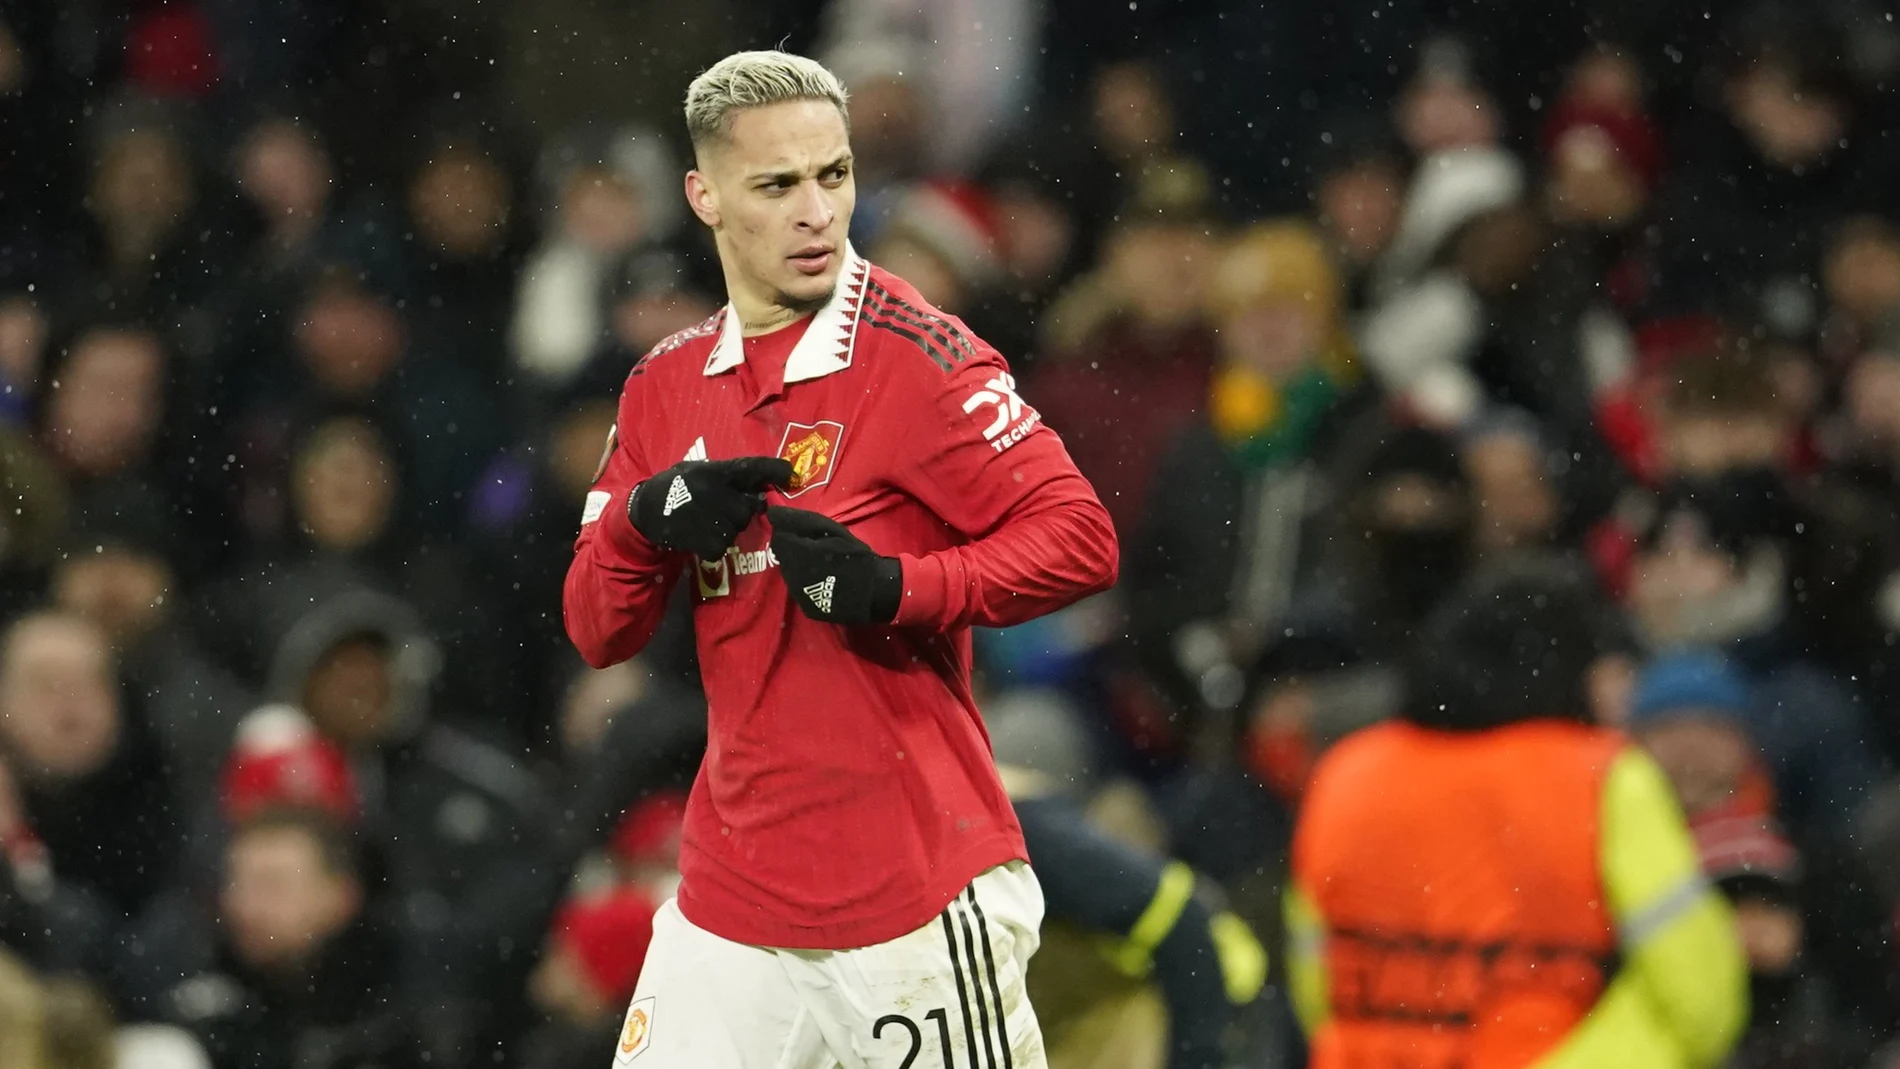 Manchester United's Antony celebrates after scoring his side's second goal during the Europa League round of 16 first leg soccer match between Manchester United and Real Betis at the Old Trafford stadium in Manchester